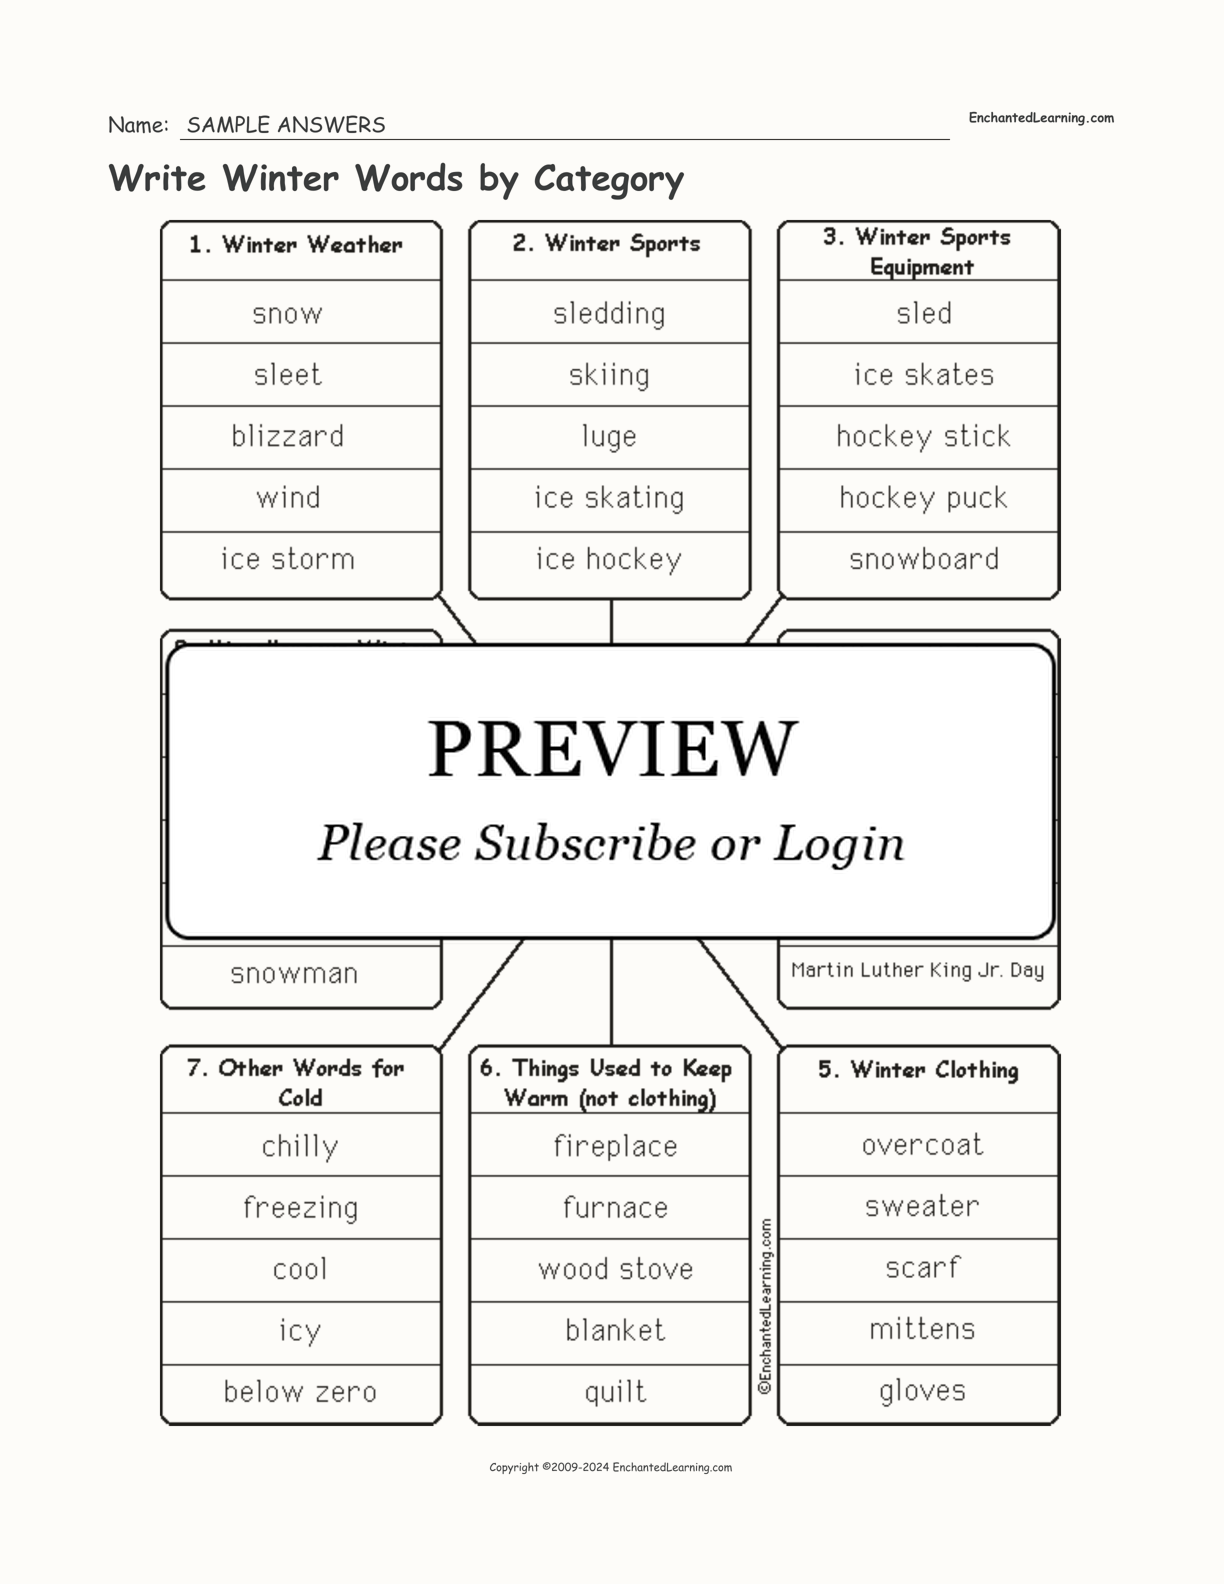 Write Winter Words by Category interactive worksheet page 2